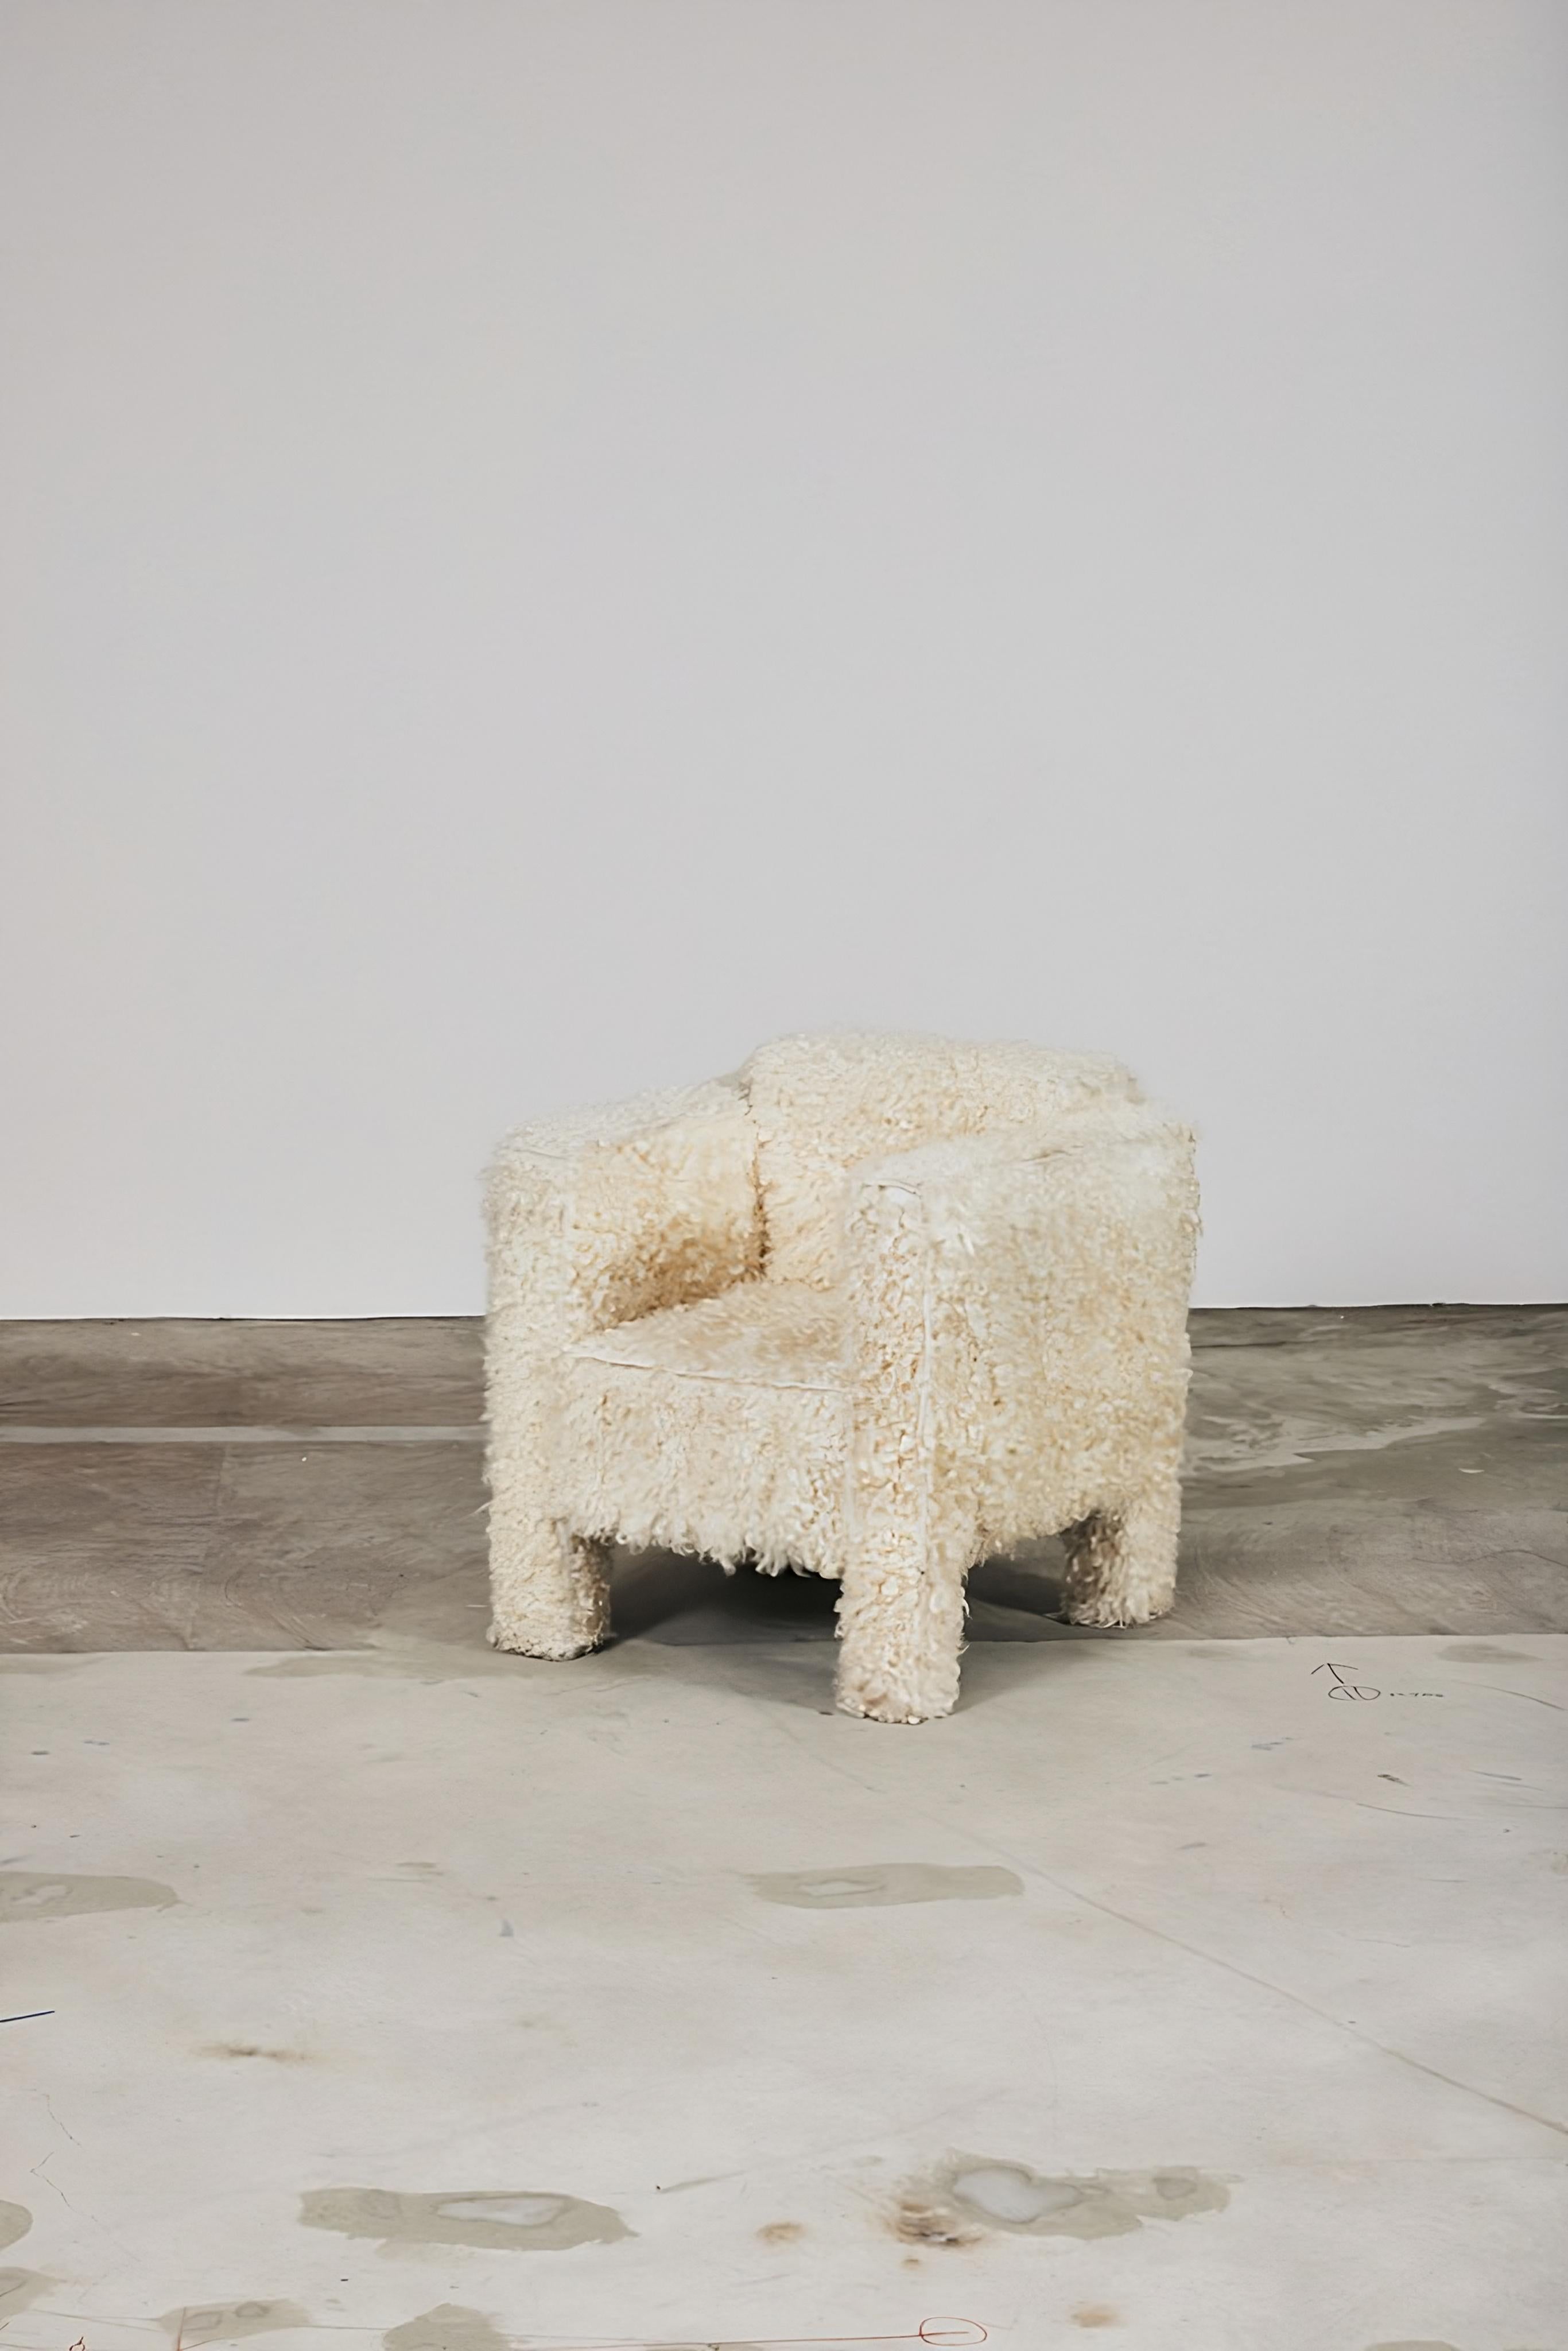 Unique Piet Hein Eek fauteuil from 2018.

angora wool upholstery covering a timber frame

edition of 2, comprised of a 2018 model that was recently produced and a 1990 model that has been restored.

production-stopping item. This is a valuable